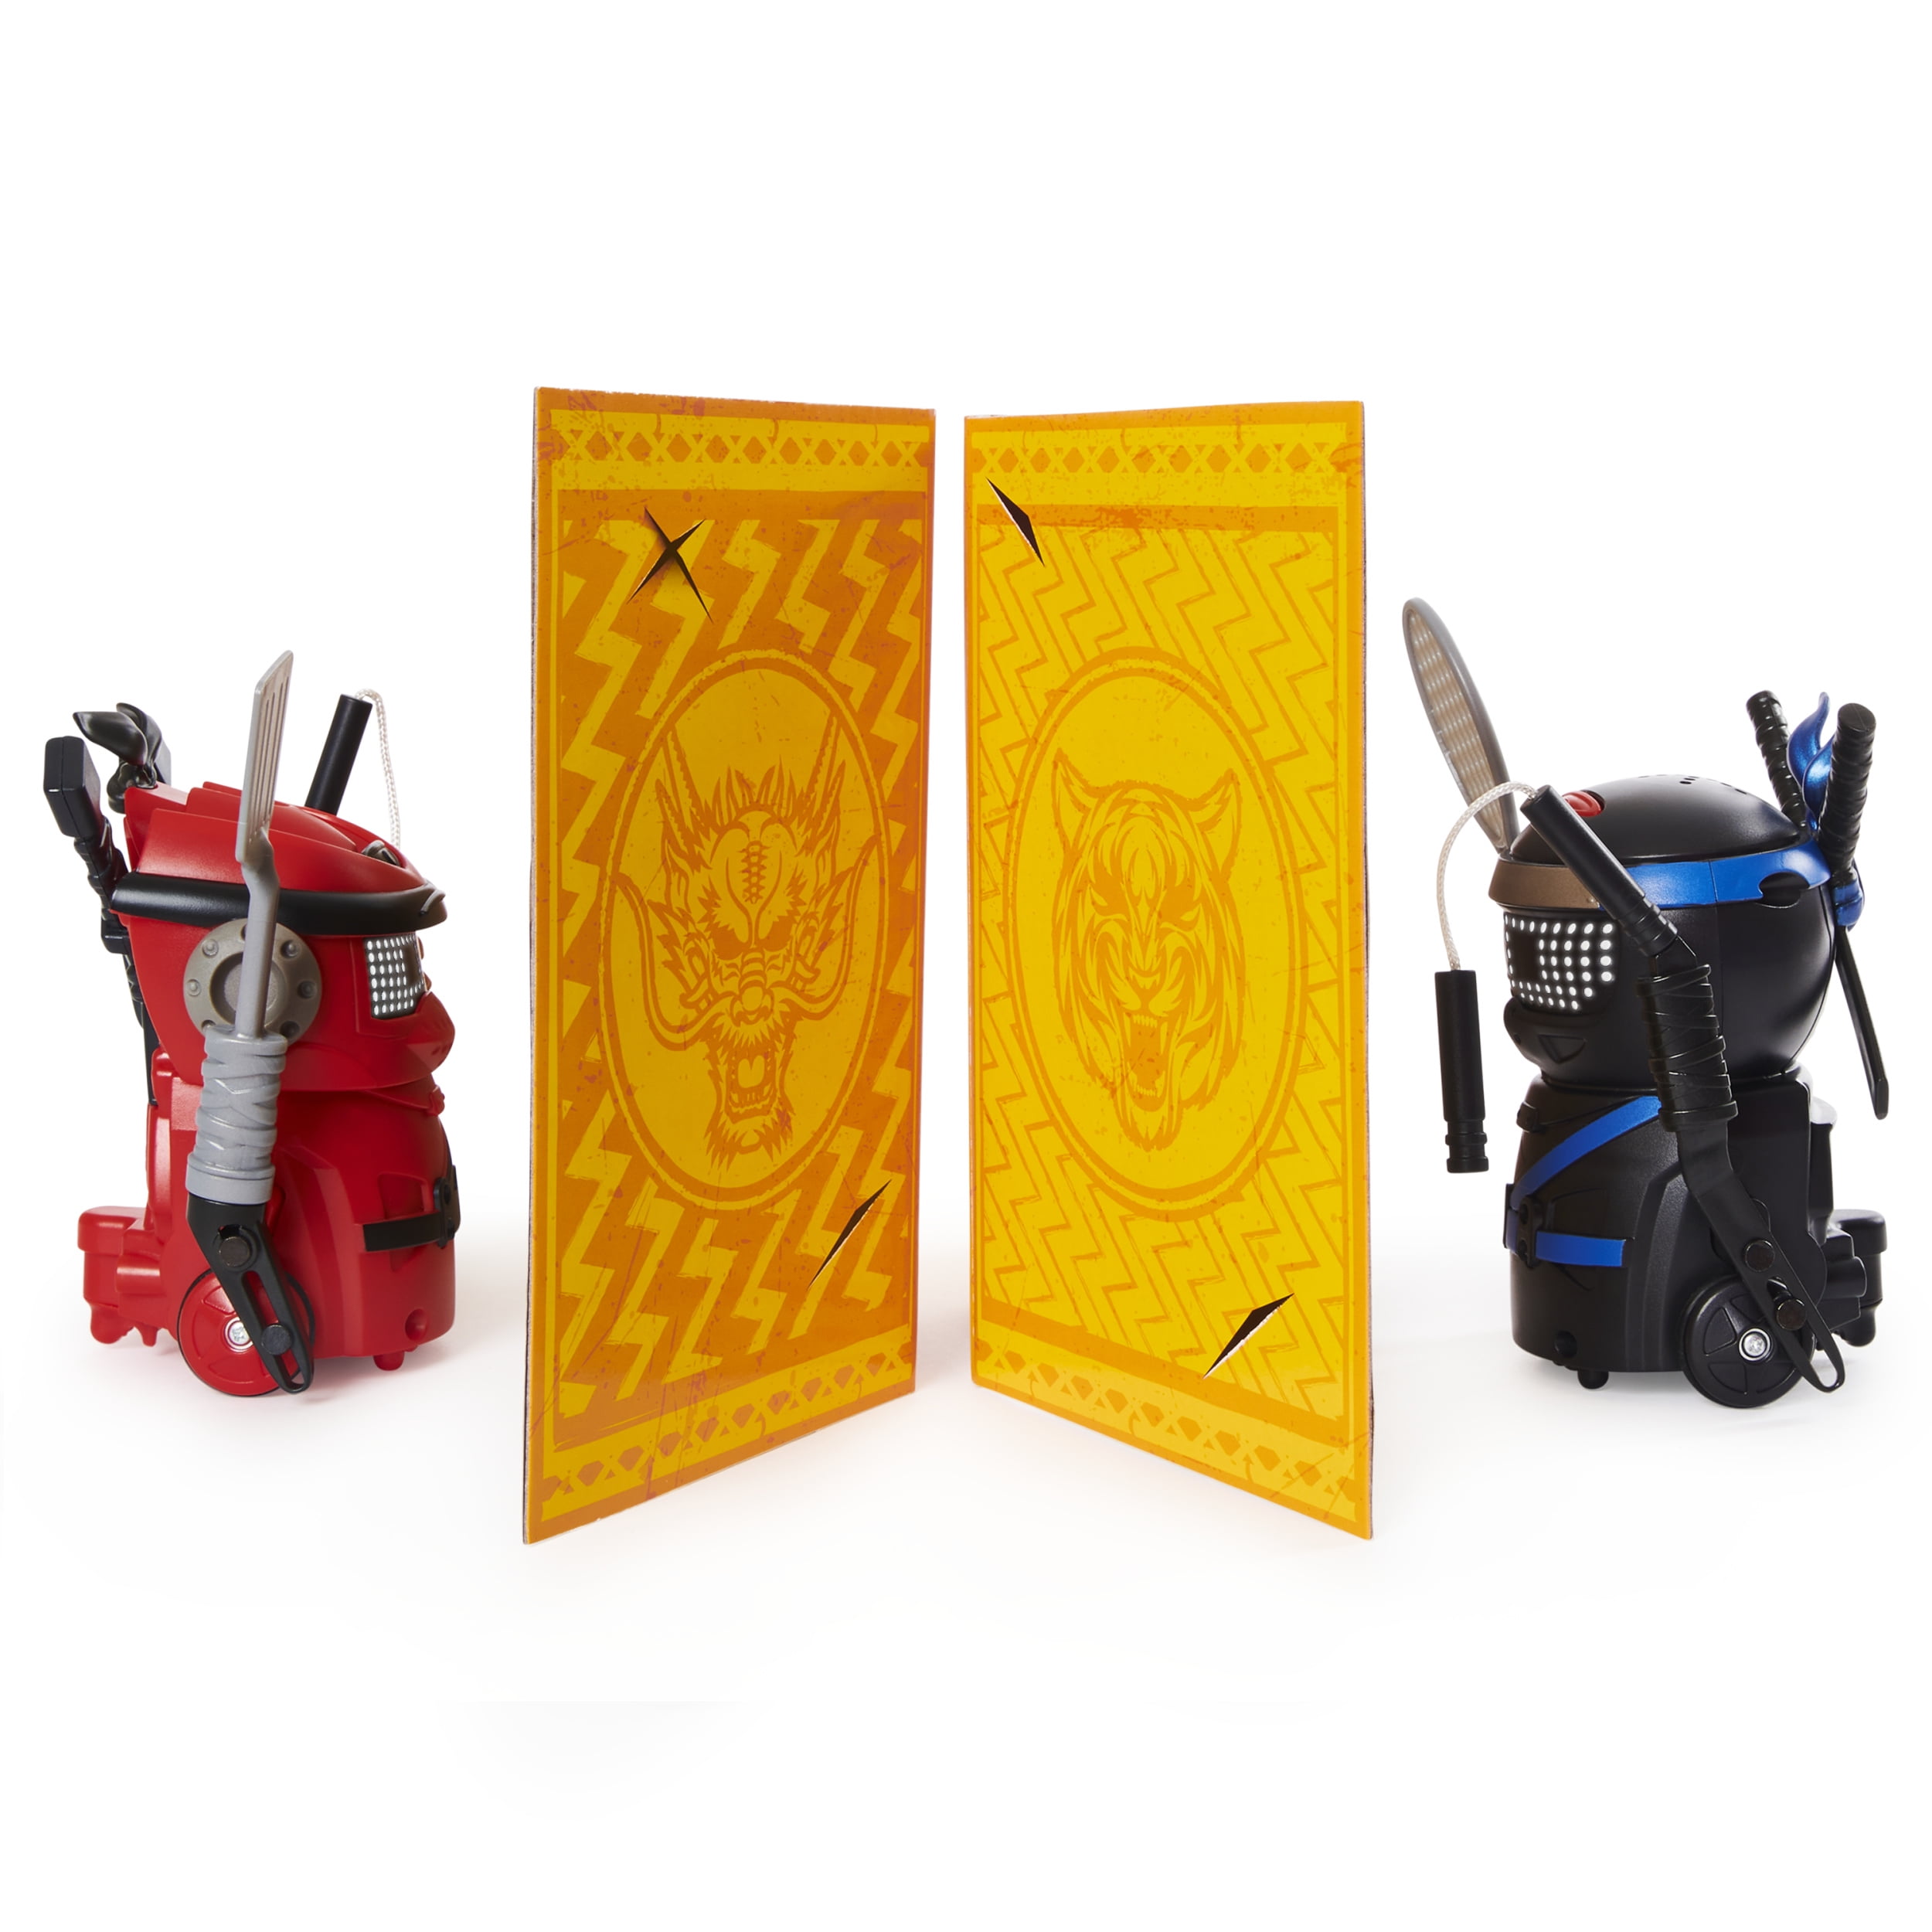 Ninja Bots 2-Pack Hilarious Battling Robots Red Black with 6 Fight Accessories